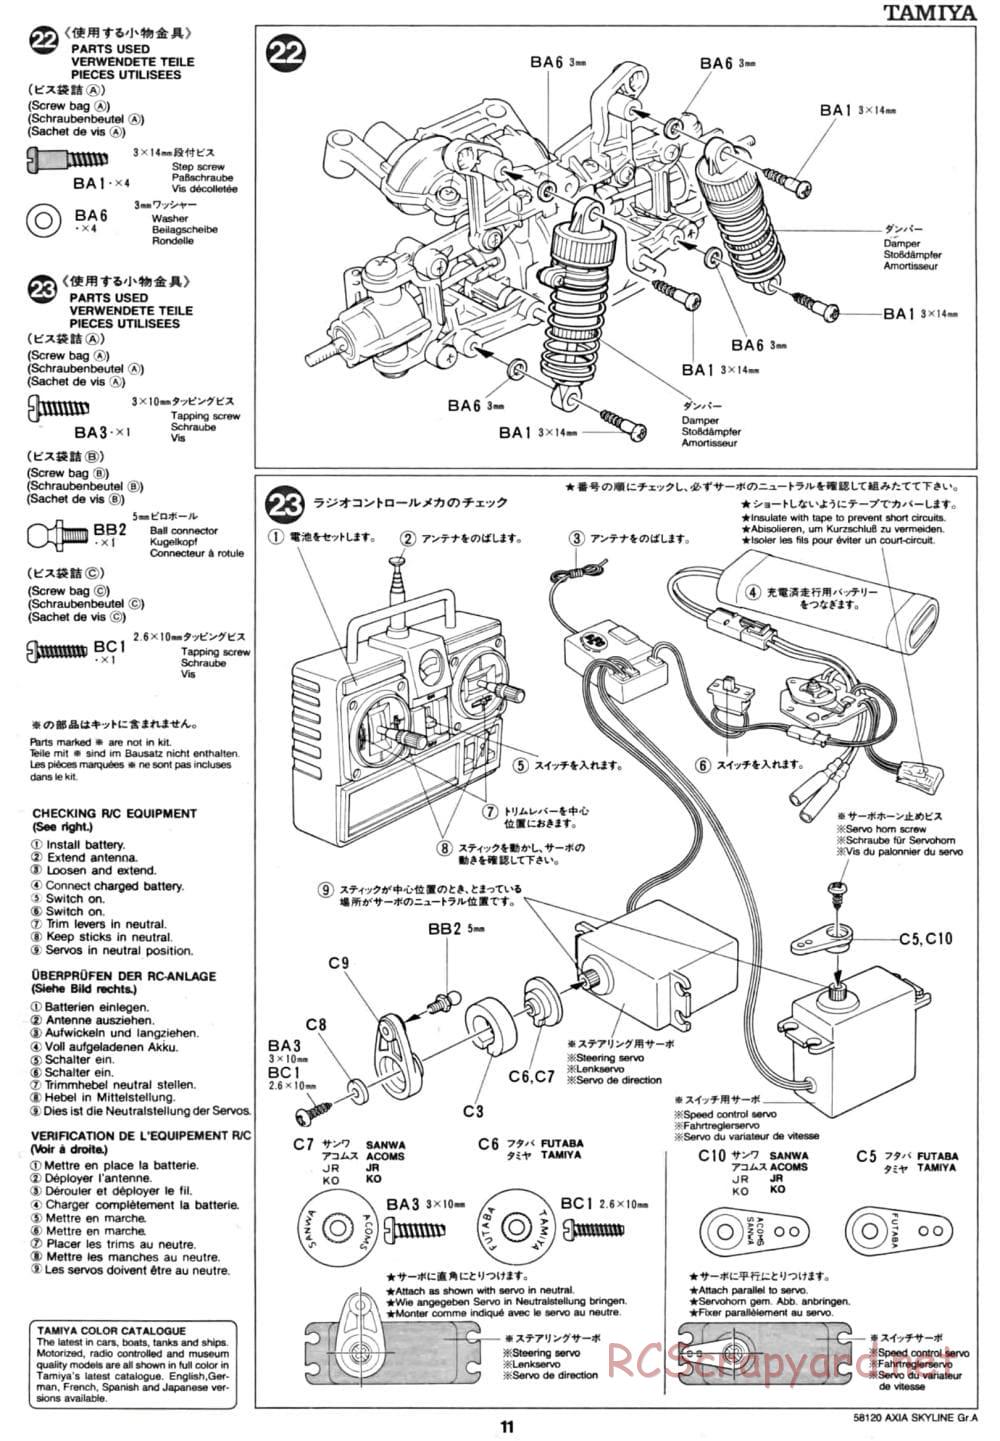 Tamiya - Axia Skyline GT-R Gr.A - TA-01 Chassis - Manual - Page 11